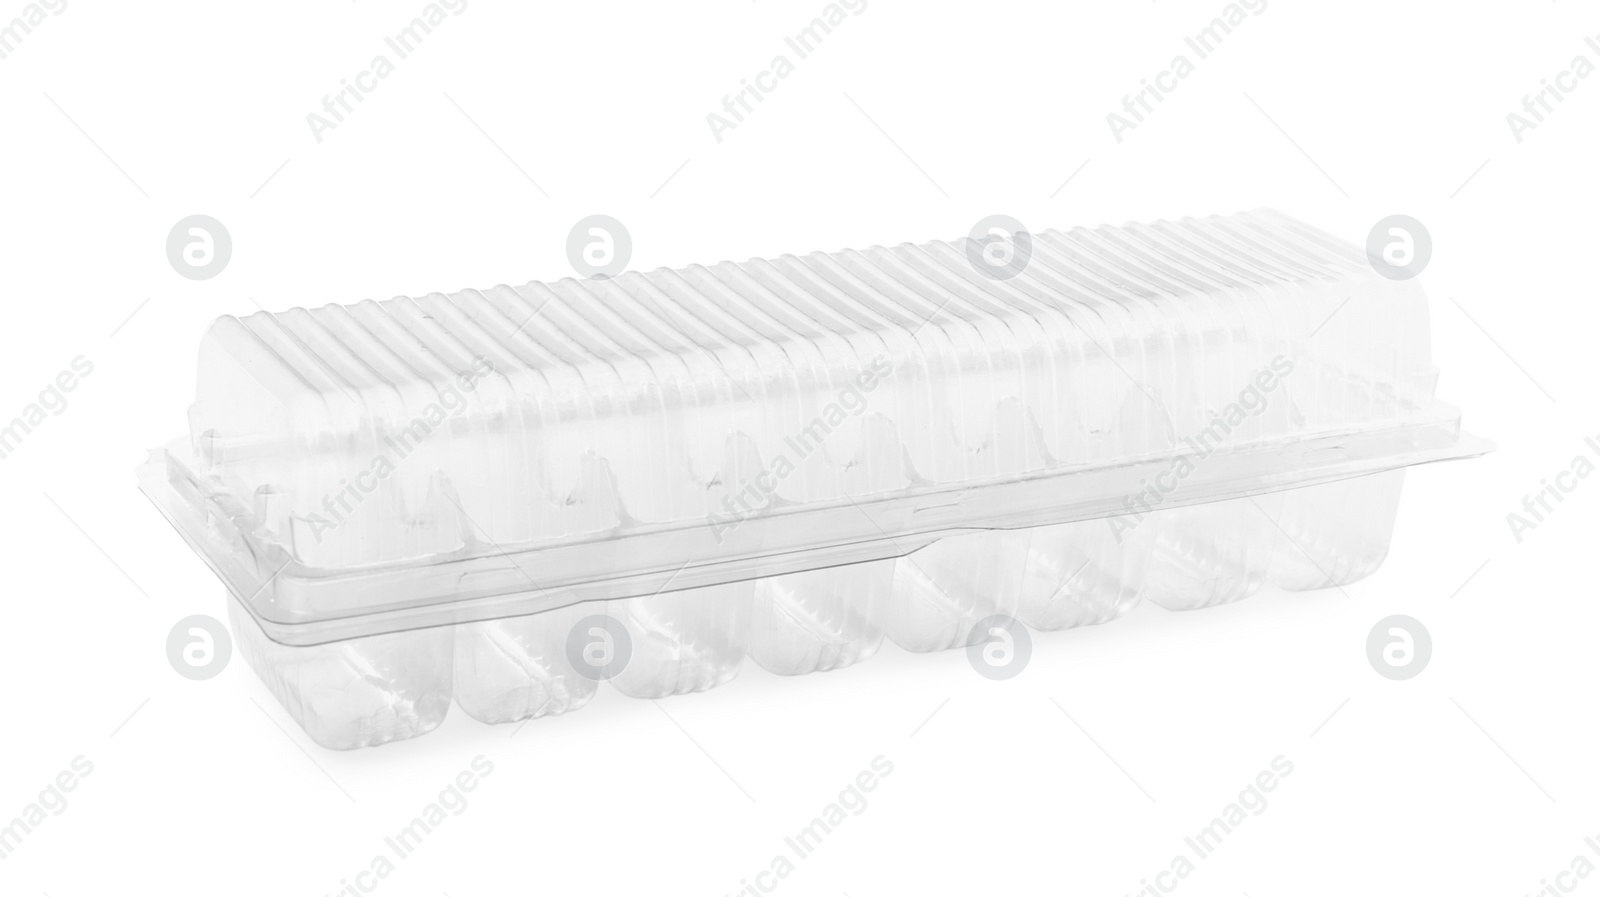 Photo of Disposable plastic lunch box isolated on white